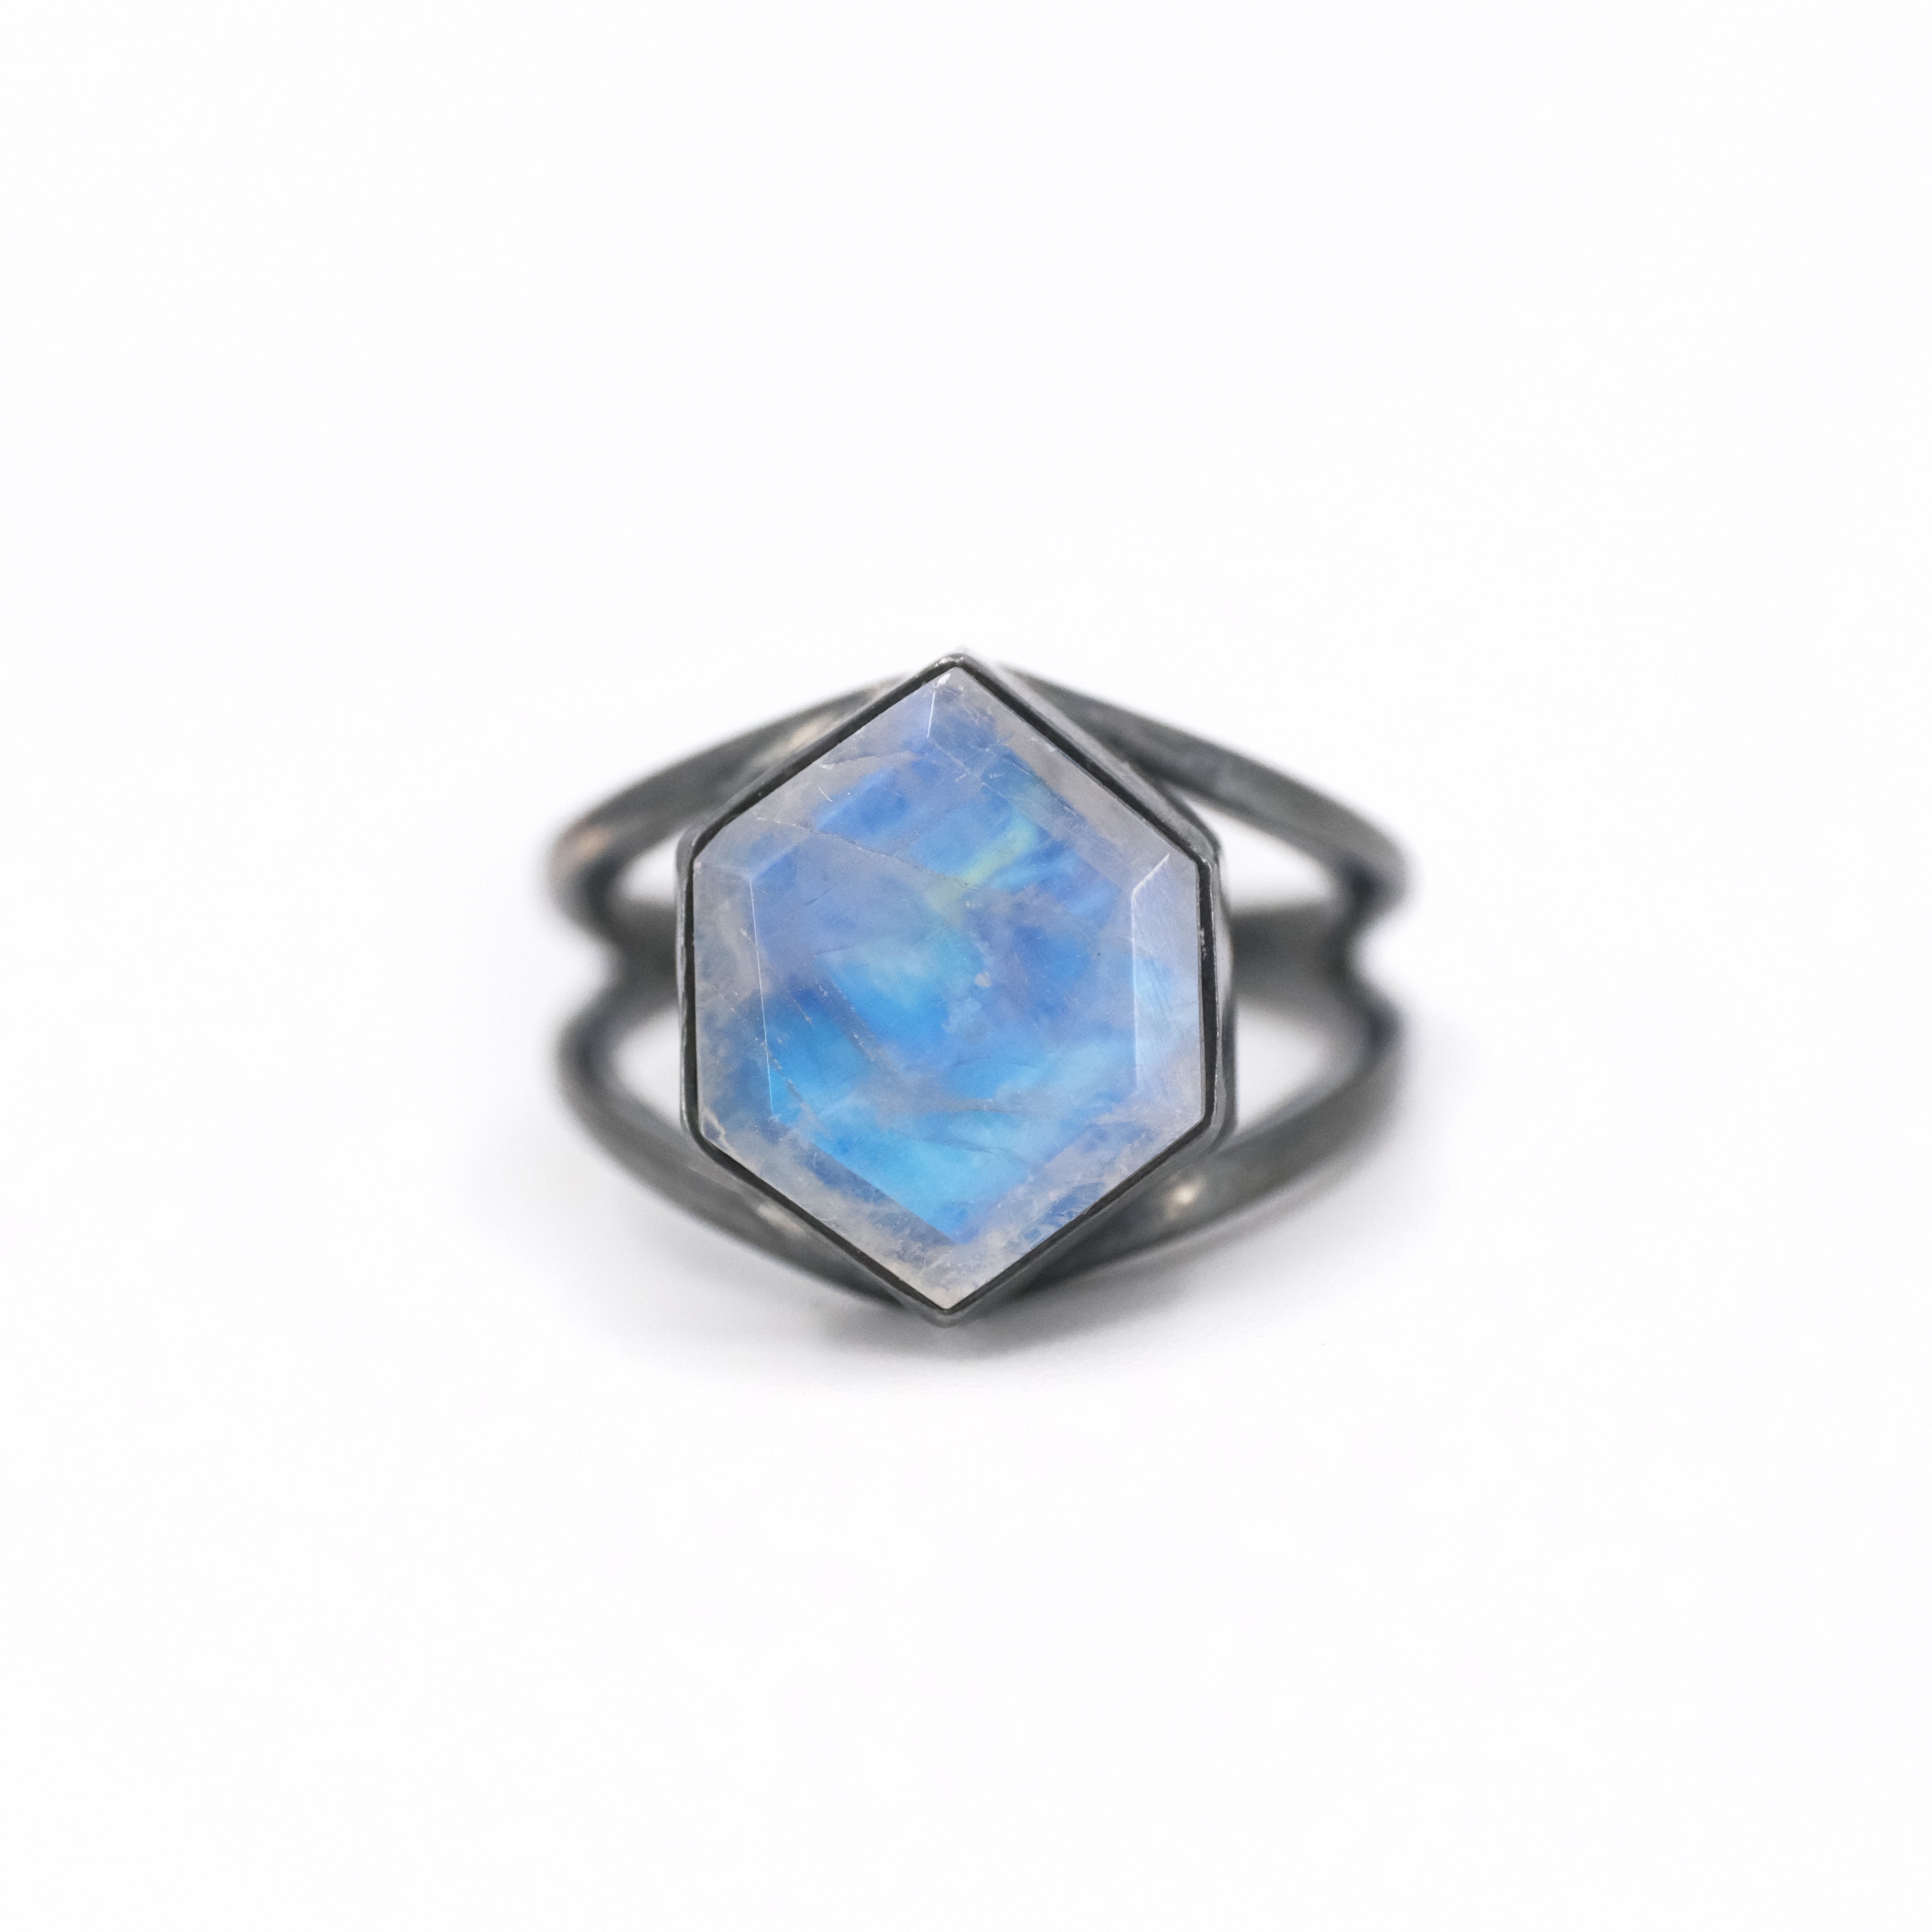 Moonstone Night Glimmer Ring (Size 6.5) - One of a Kind